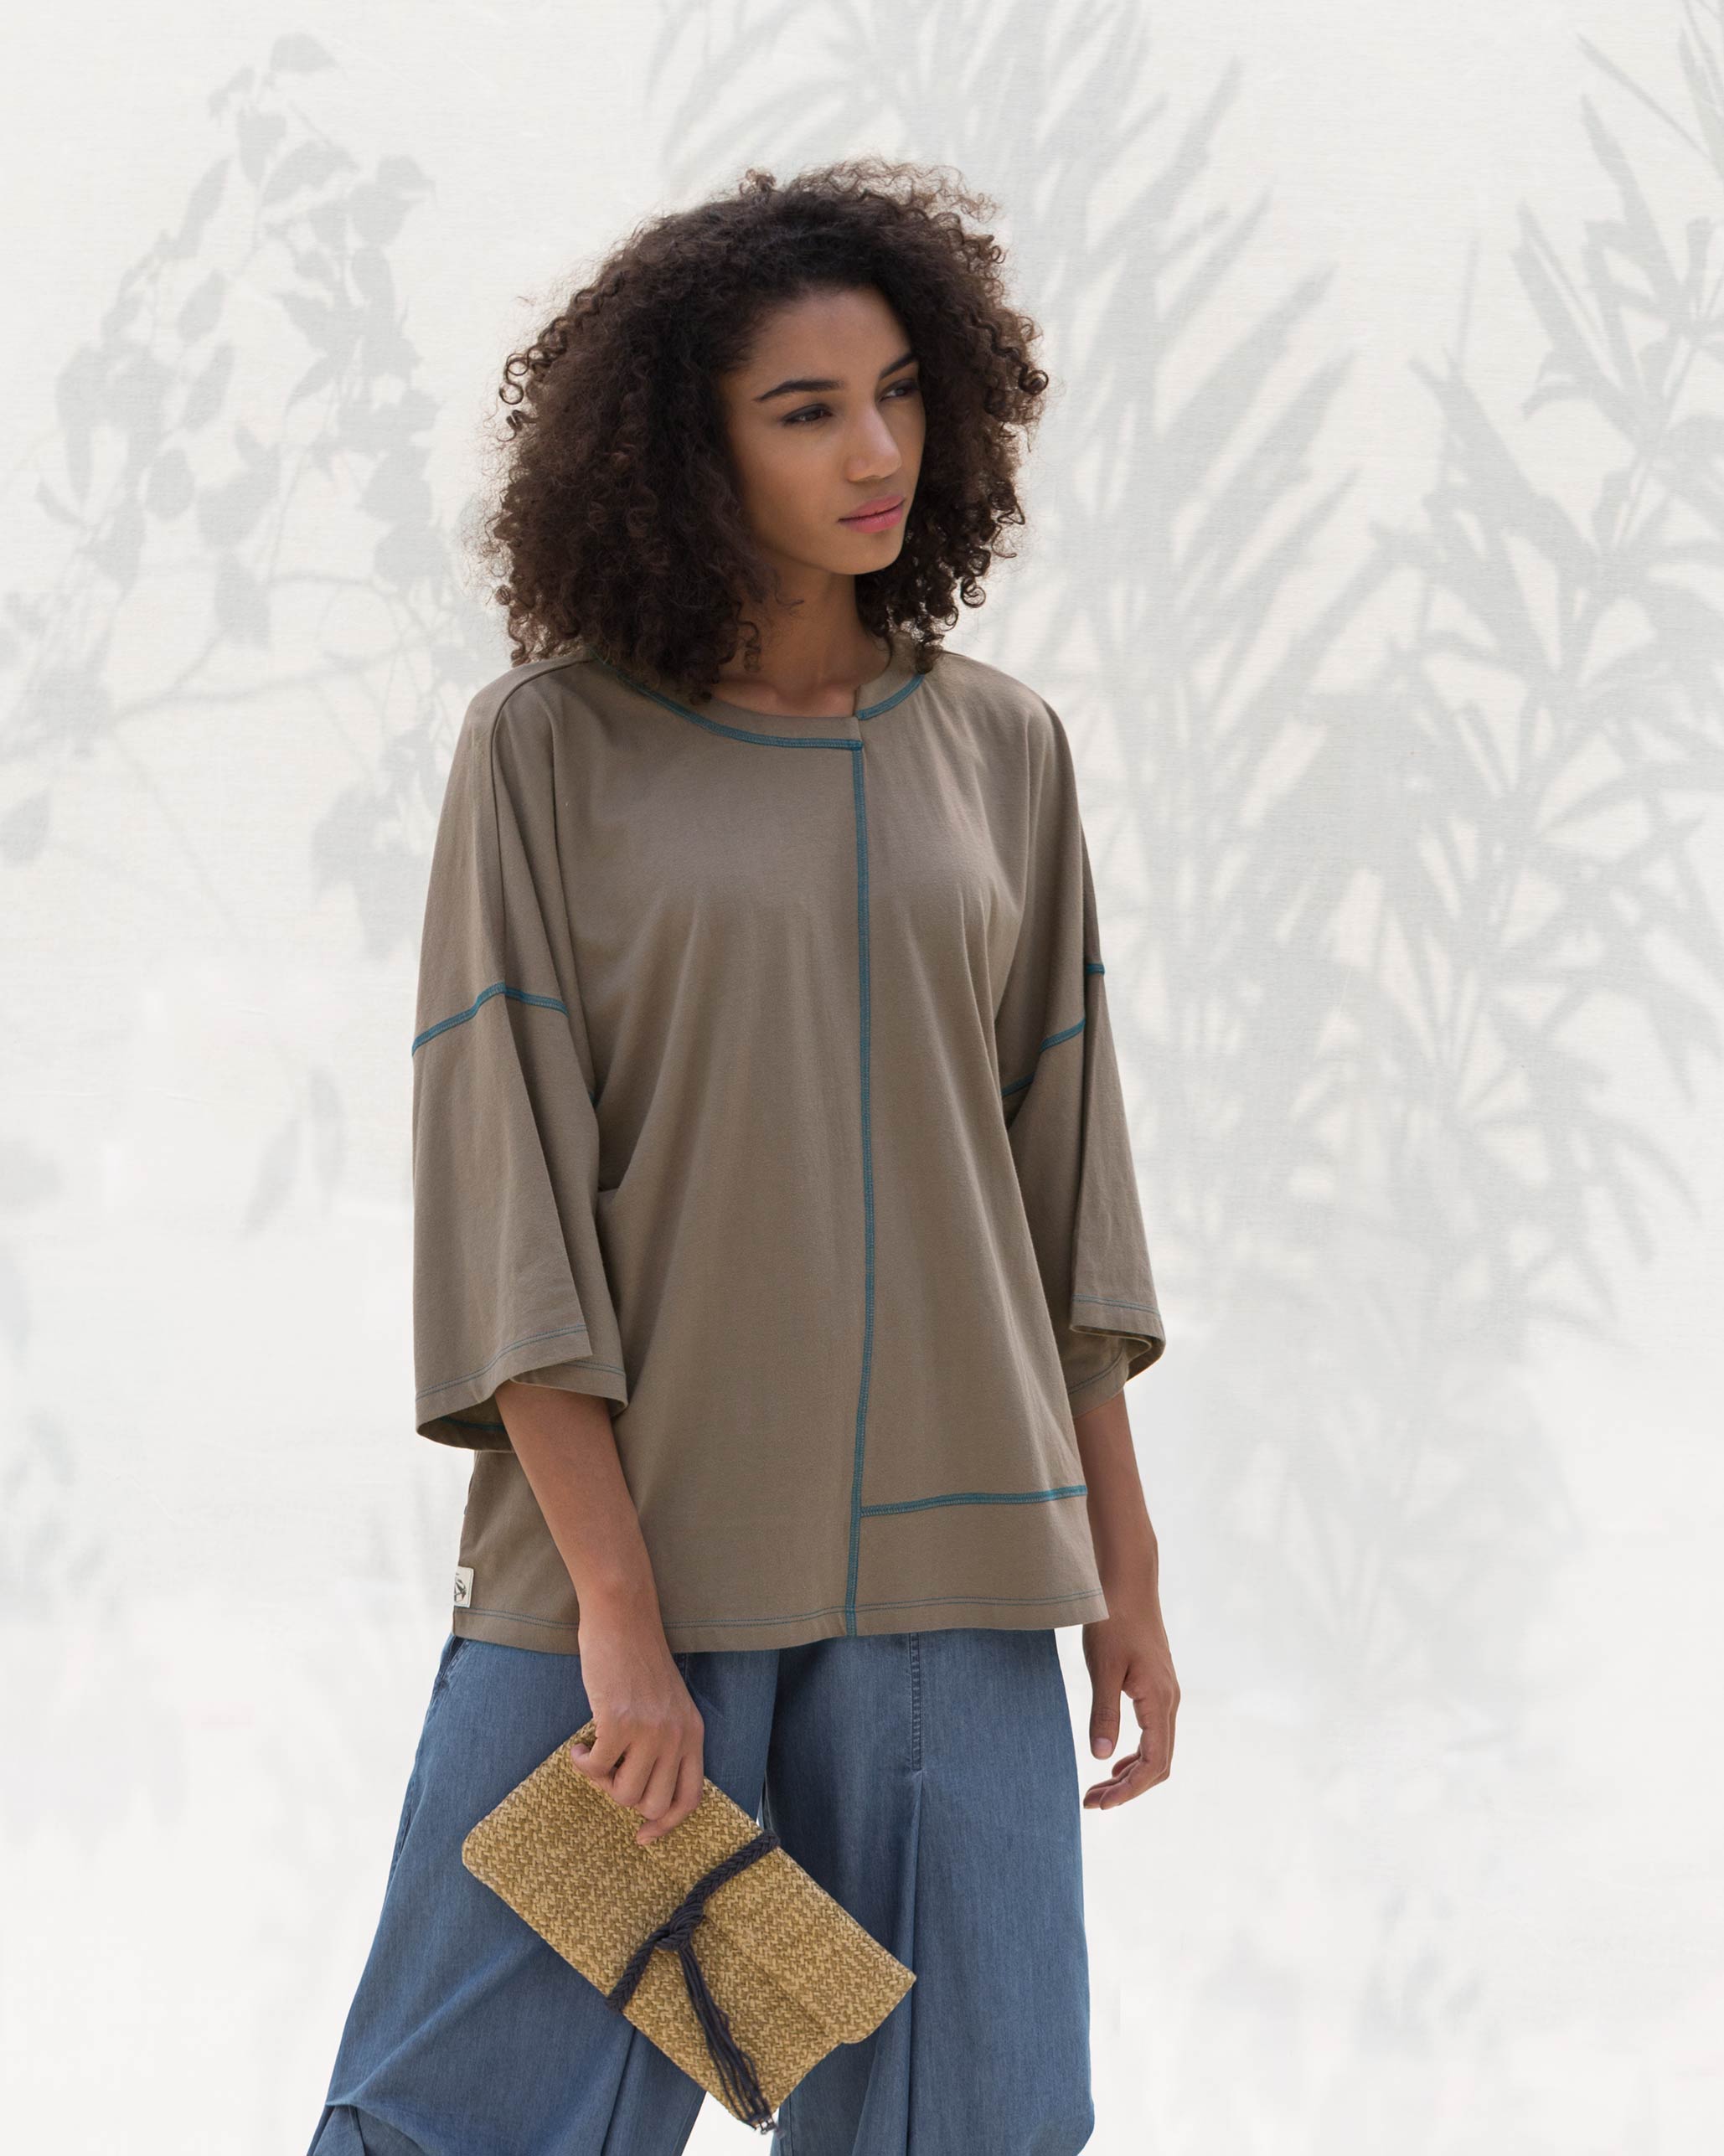 The Layover Top - Brown